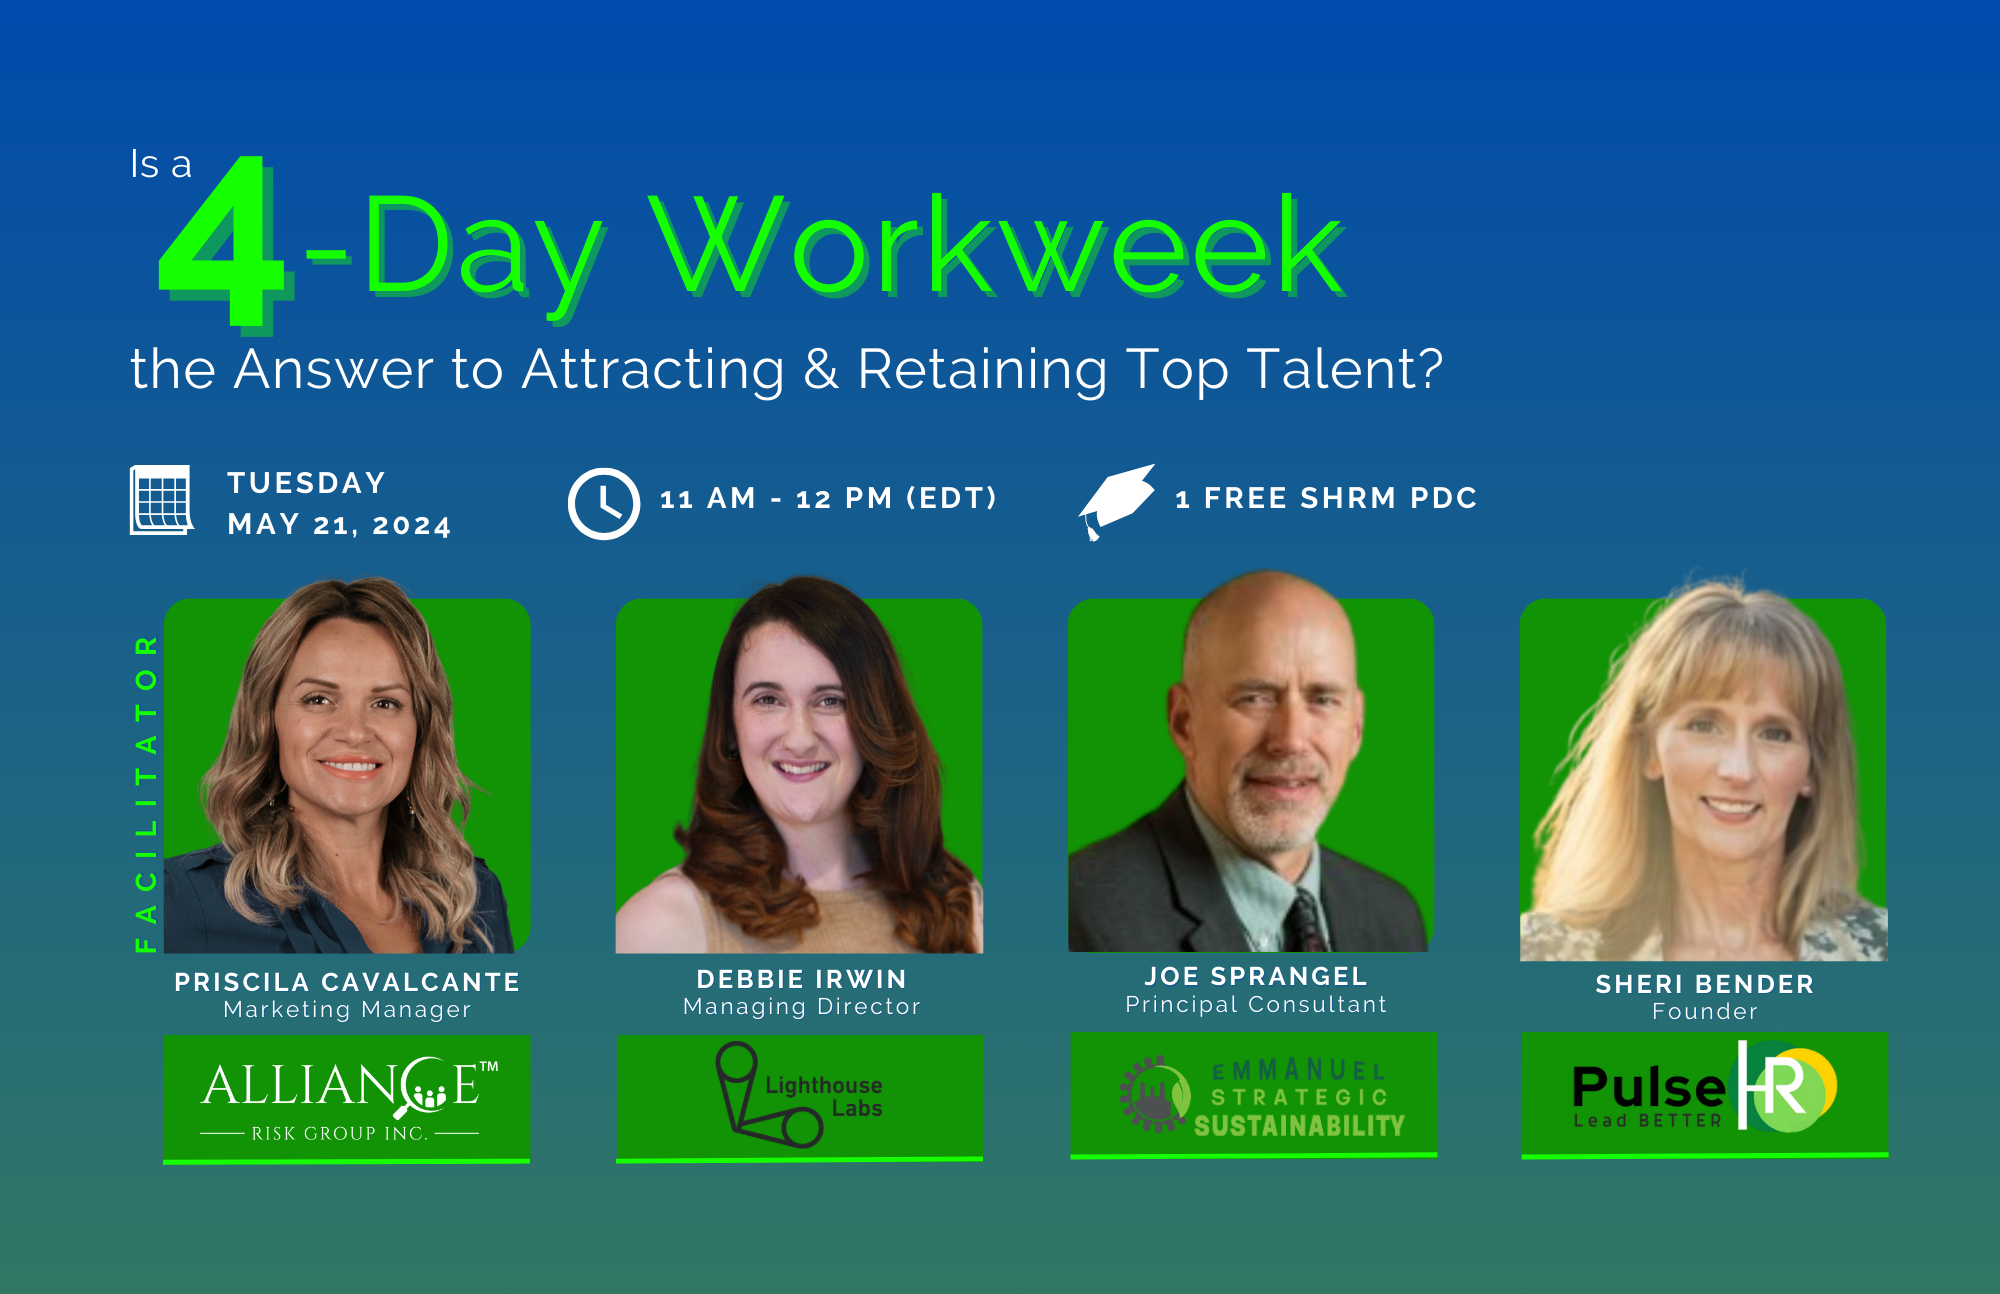 Is a 4-Day Workweek the Answer to Attracting & Retaining Top Talent?